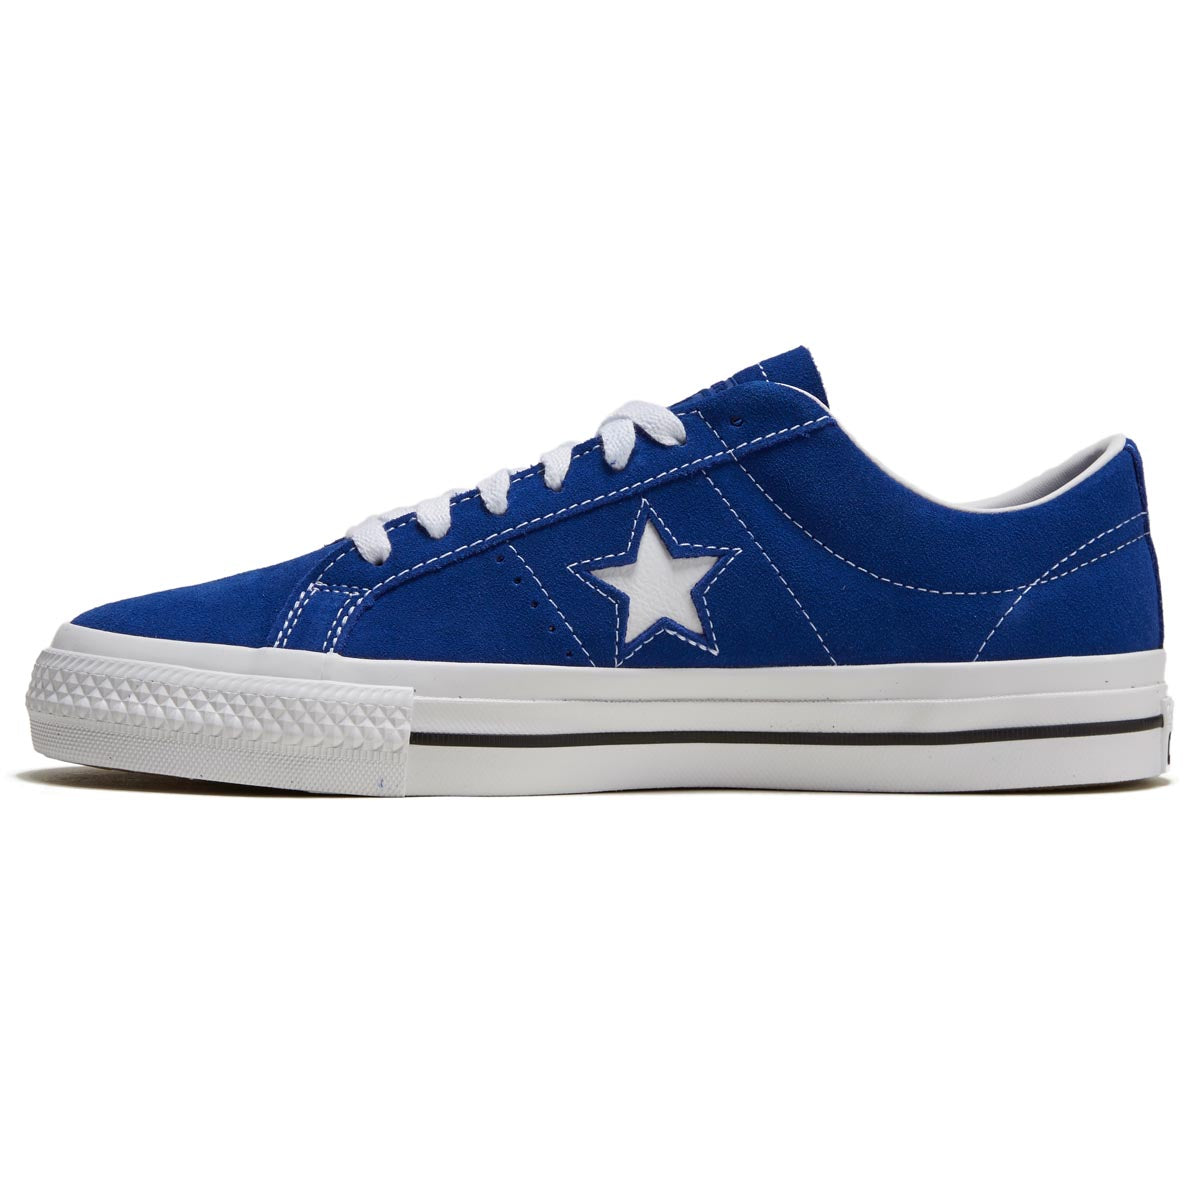 Converse One Star Pro Ox Shoes - Blue/White/Black image 2